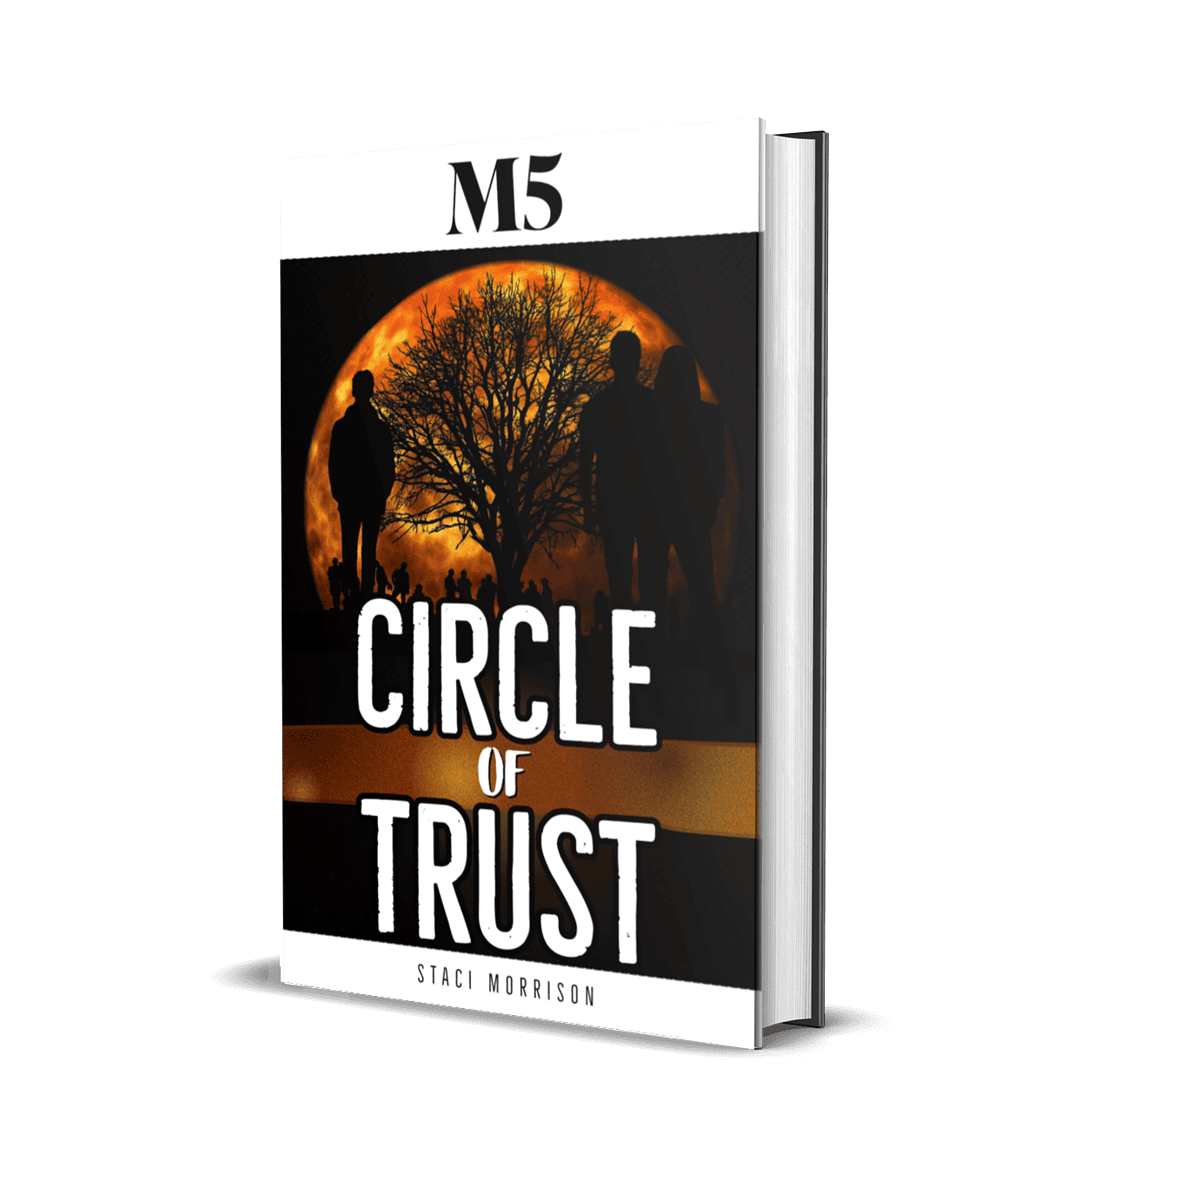 M5, circle of trust, millennium series, epic fantasy, adventure, trust, loyalty, kingdom, hidden truths, staci morrison, captivating, thrilling, unforgettable journey, book cover with silhouettes and harvest moon